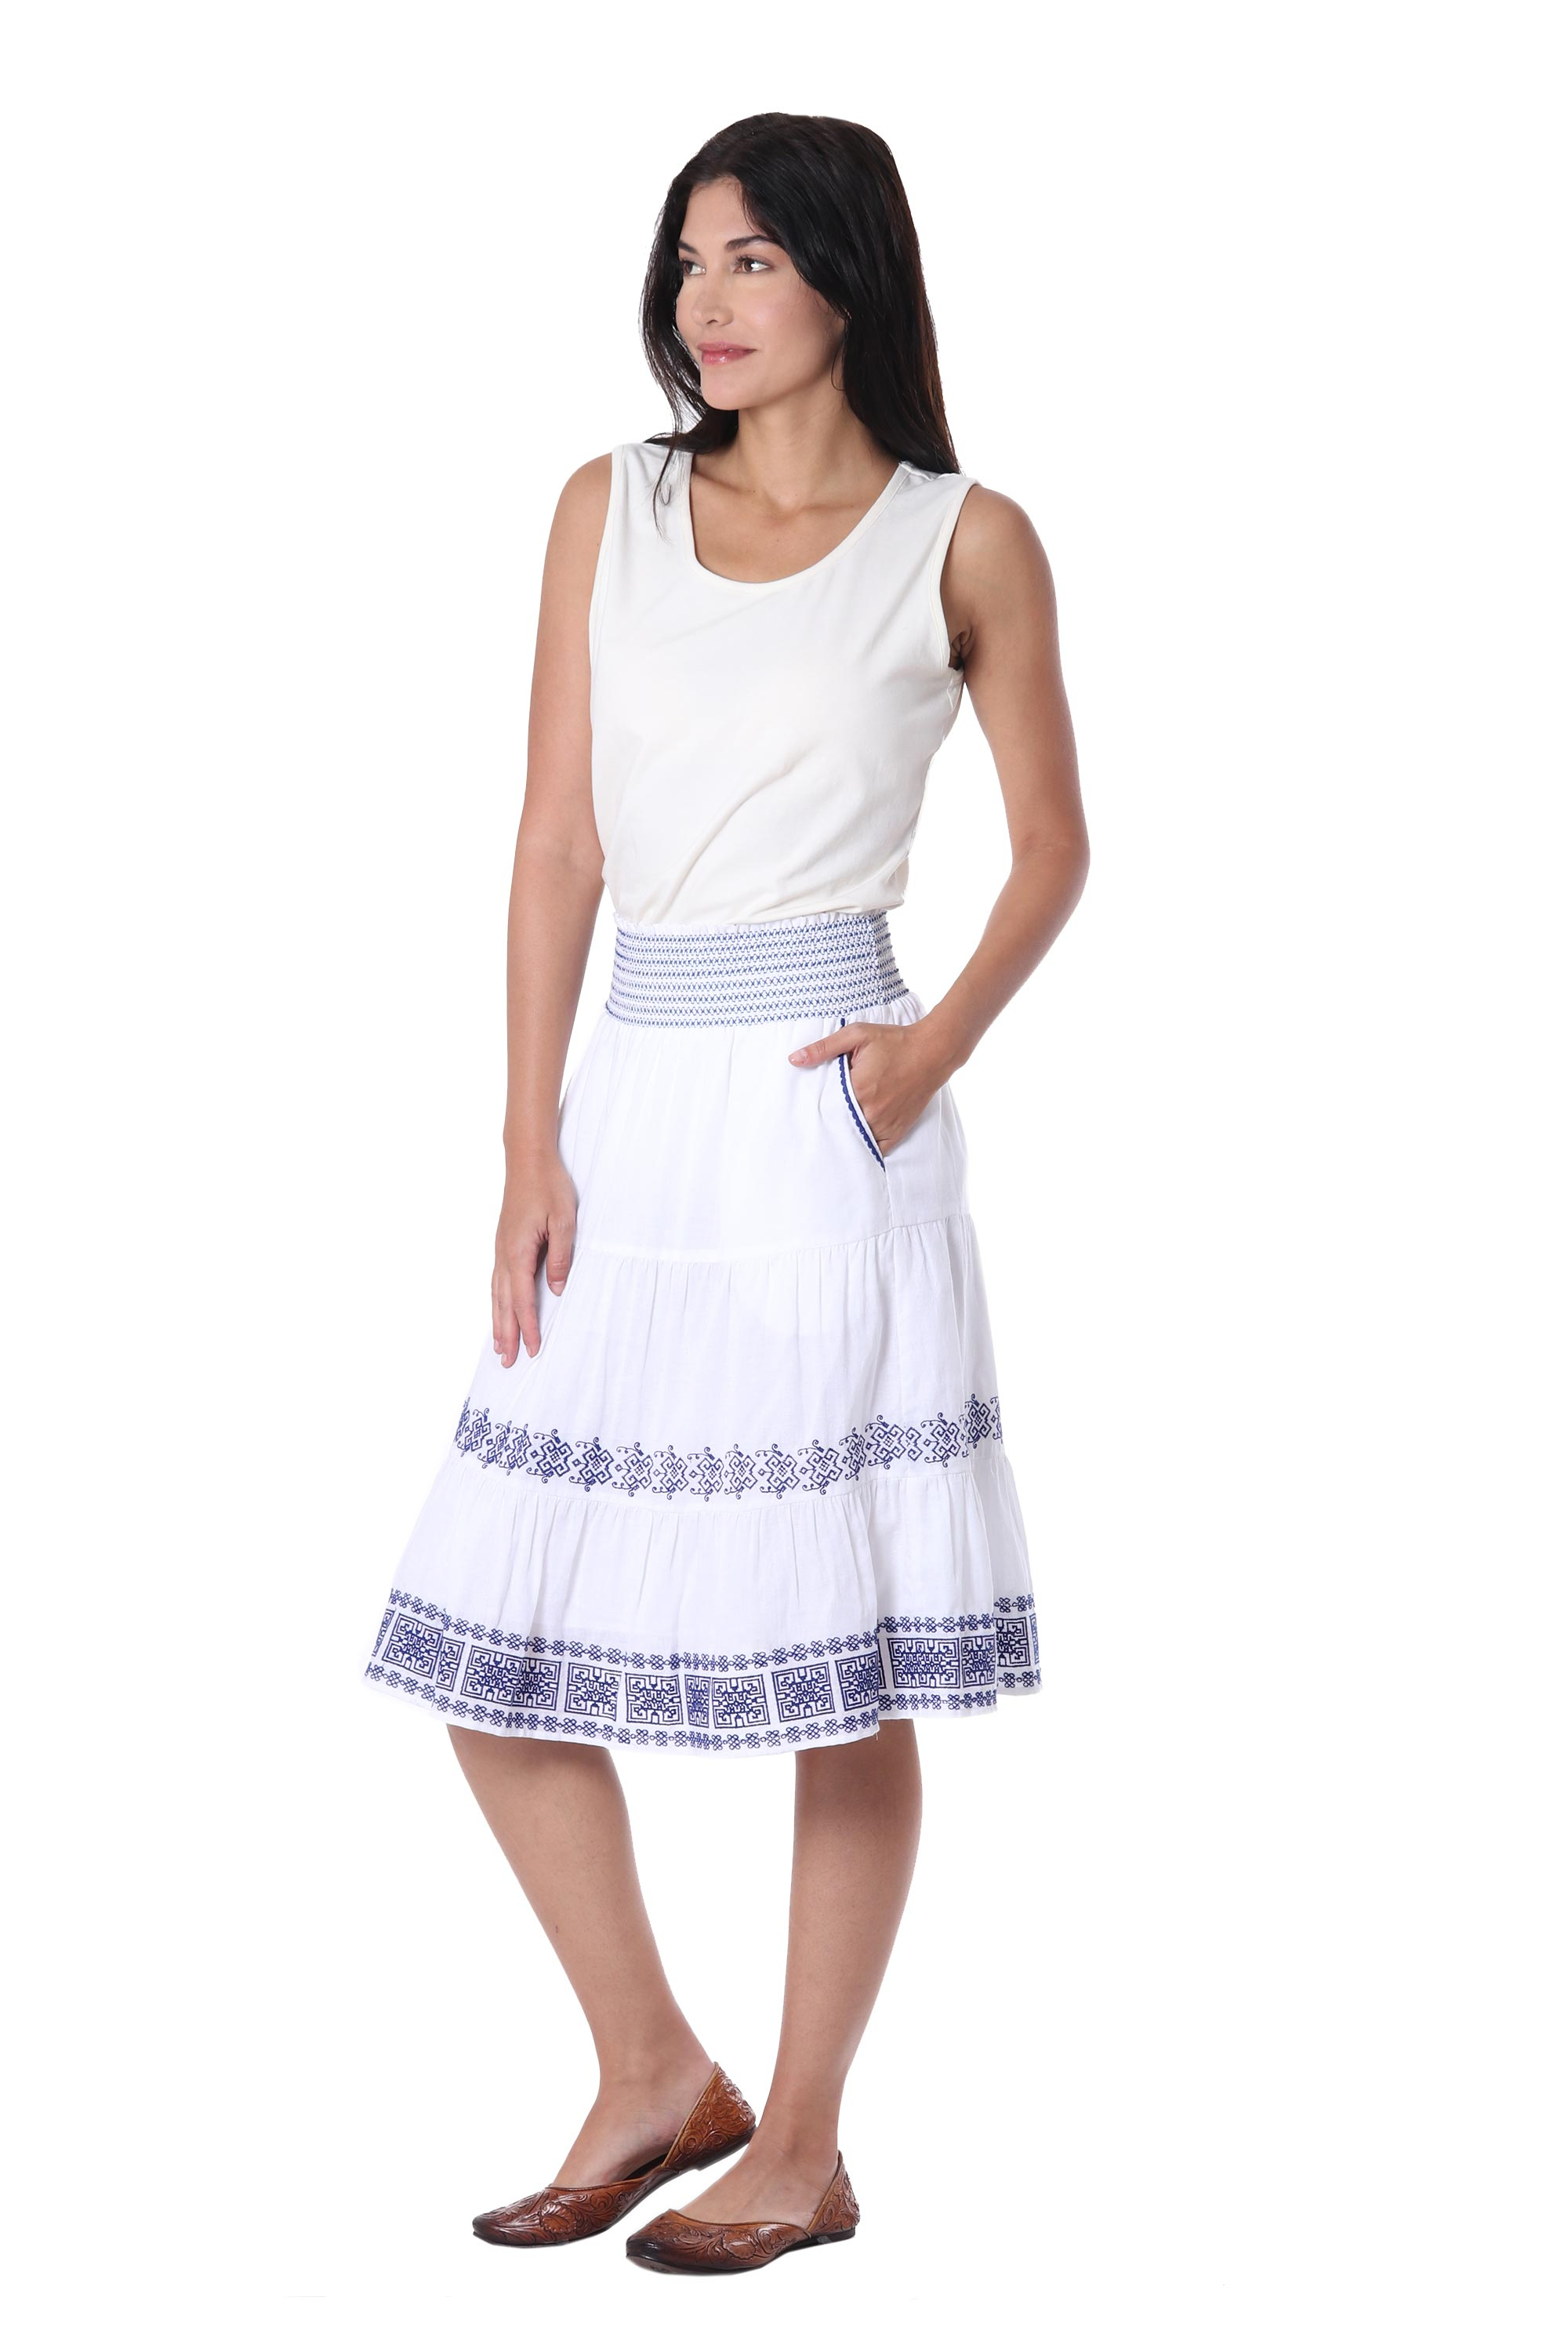 UNICEF Market | Embroidered Cotton Skirt in Lapis from India